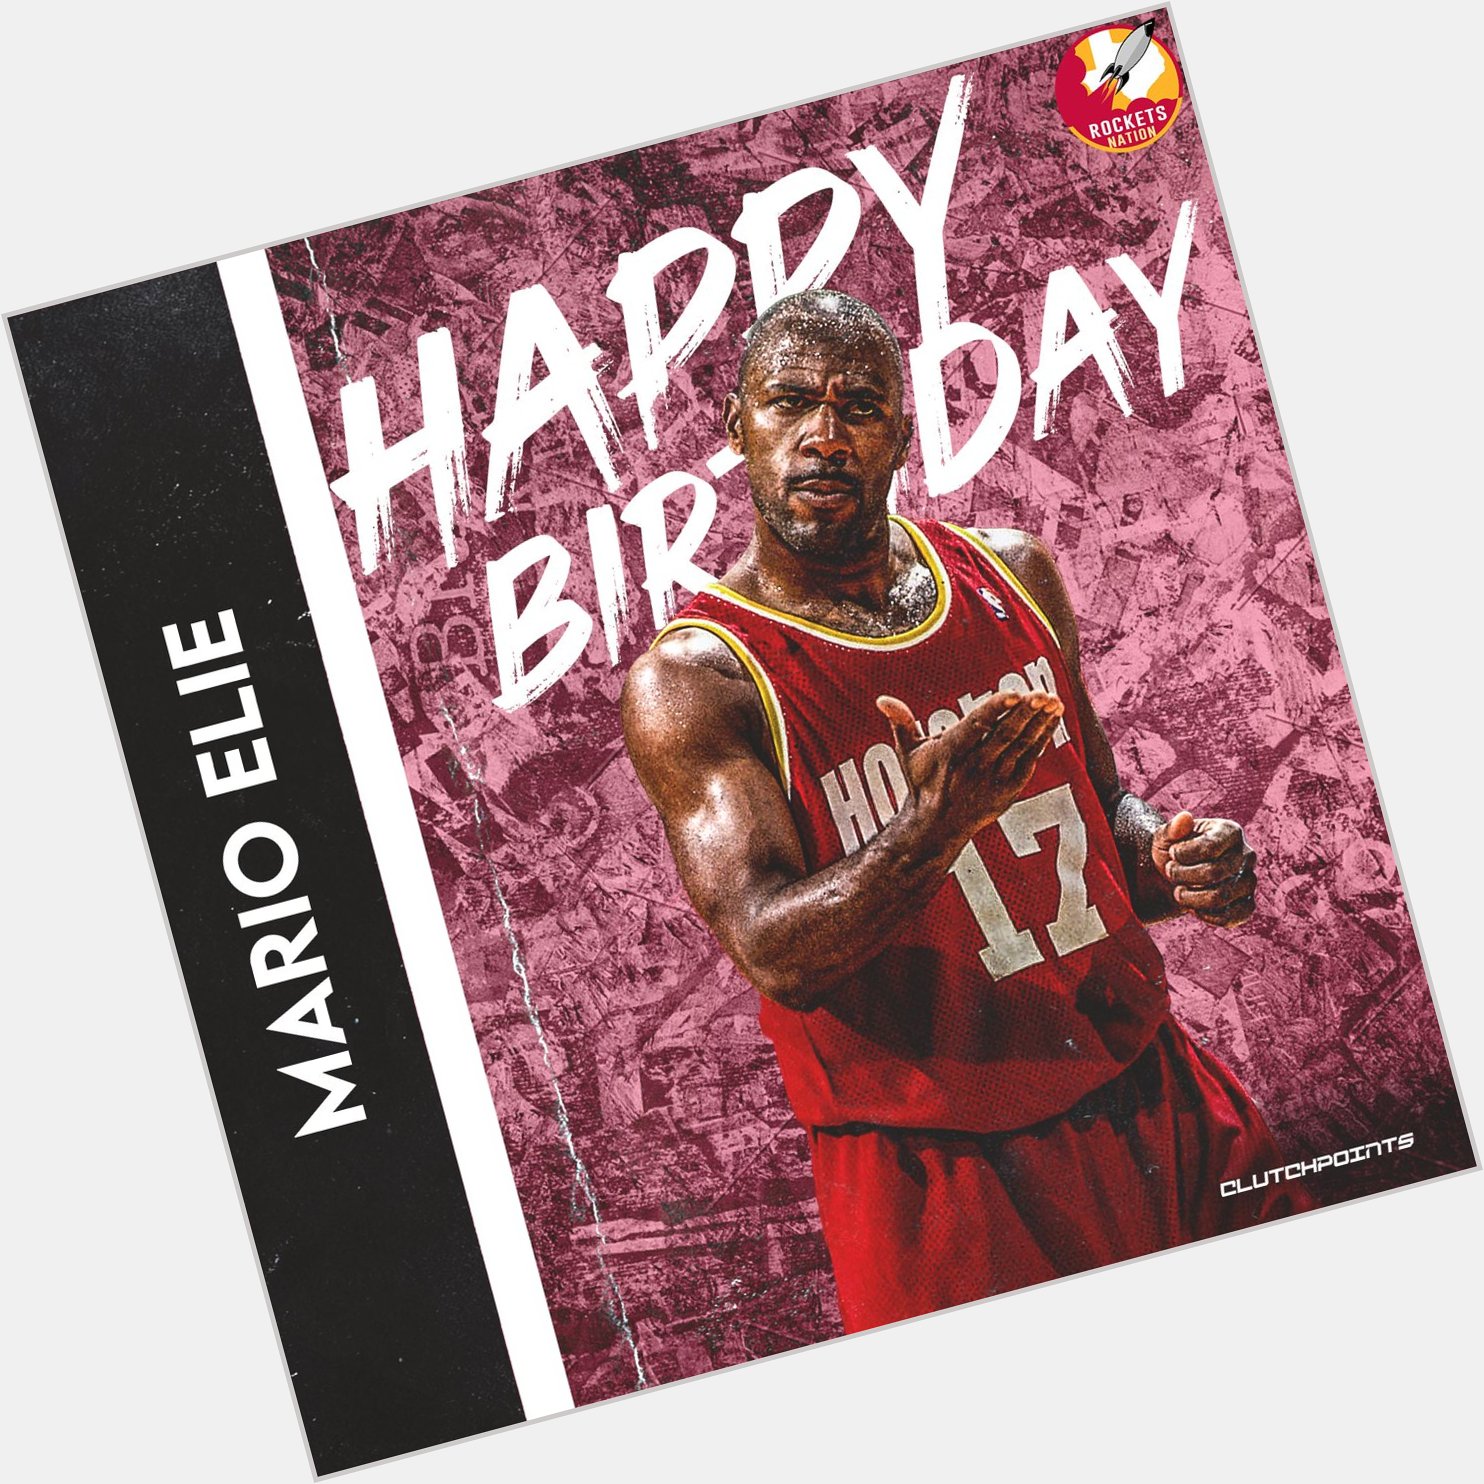 Join Rockets Nation in greeting 3-time NBA Champion Mario Elie a happy 58th birthday! 